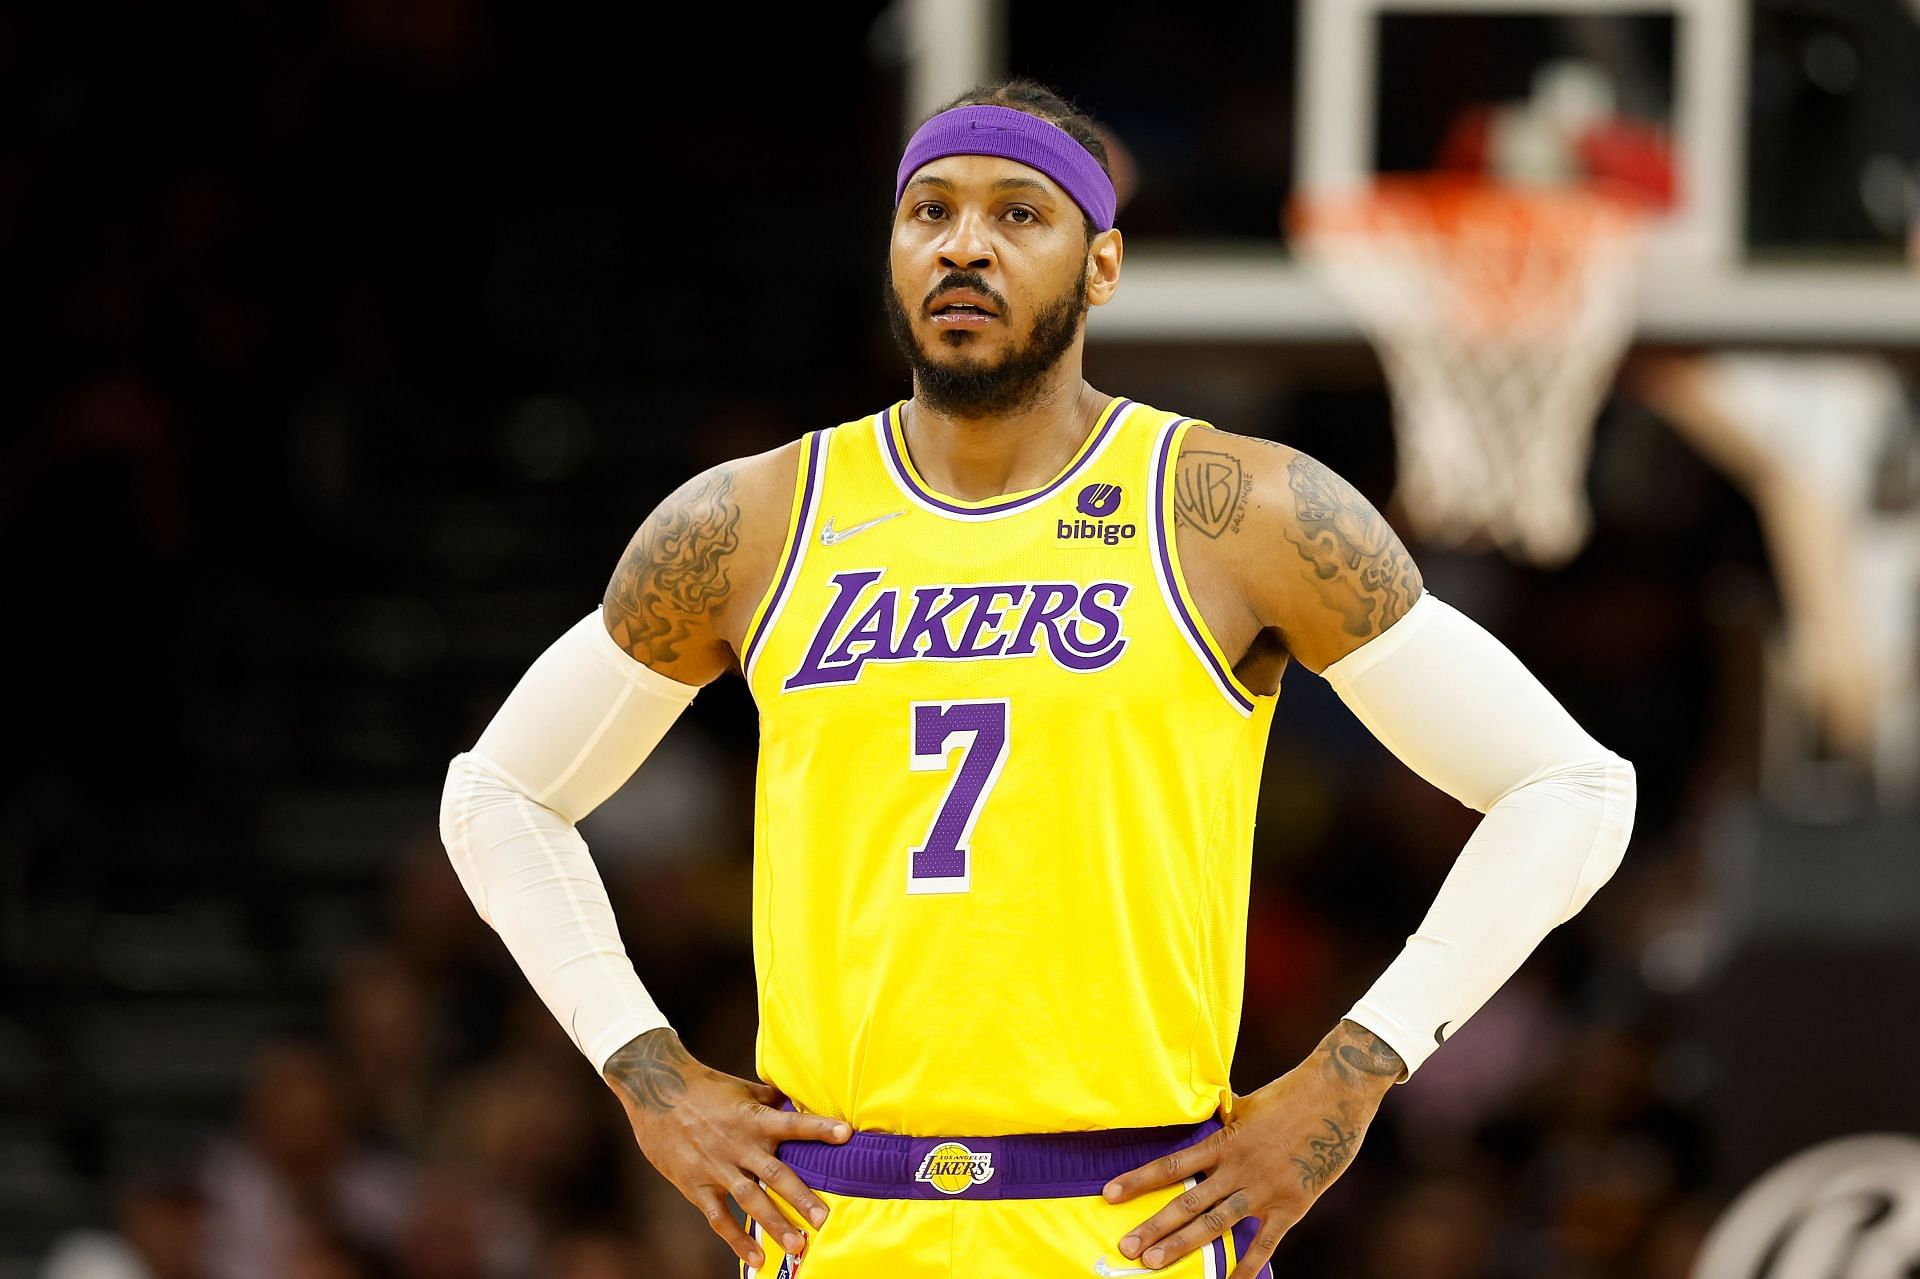 Carmelo Anthony's future in the NBA remains undecided